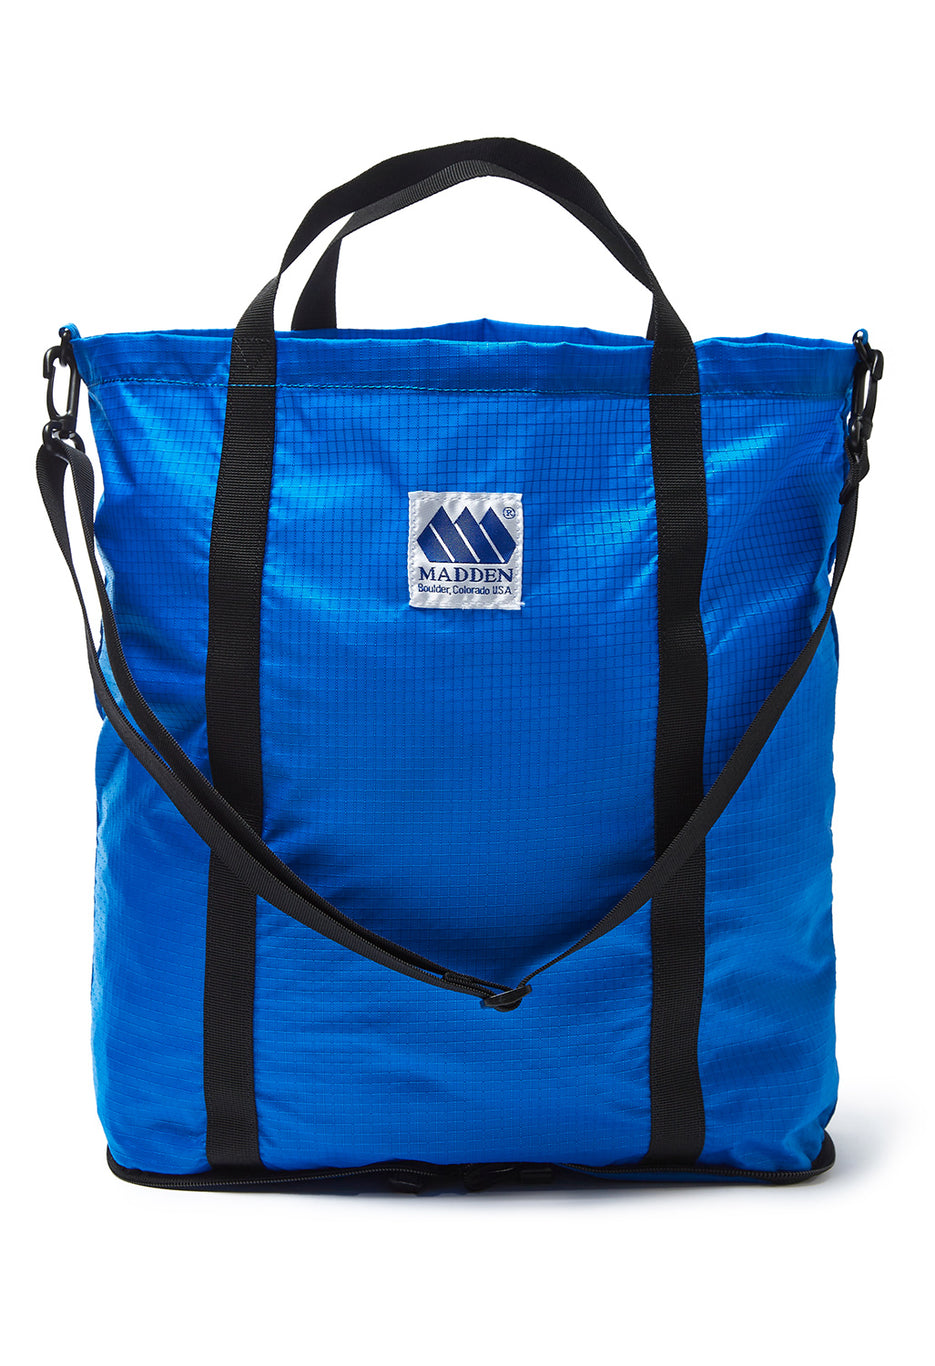 Madden Equipment Funny Tote Pack - Blue Ripstop